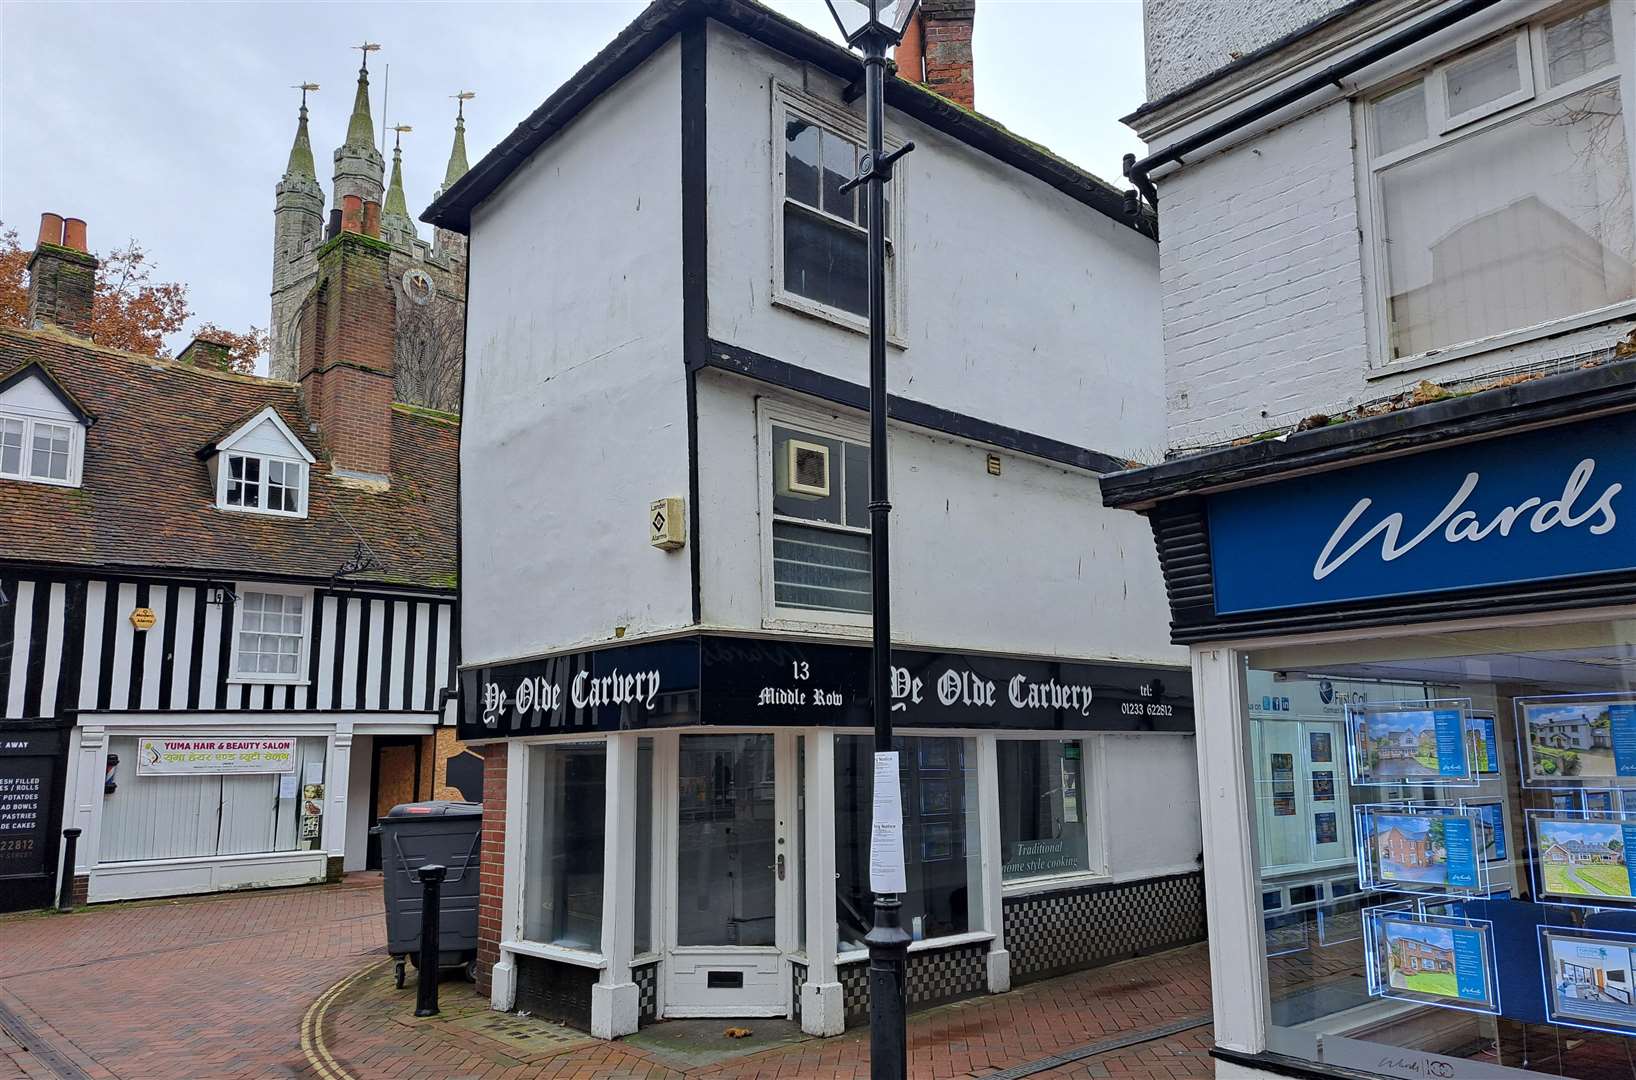 All three floors of the former Ye Old Carvery bakery in Ashford could be used for the salon. The bakery shut earlier this year and relocated to a shop nearby